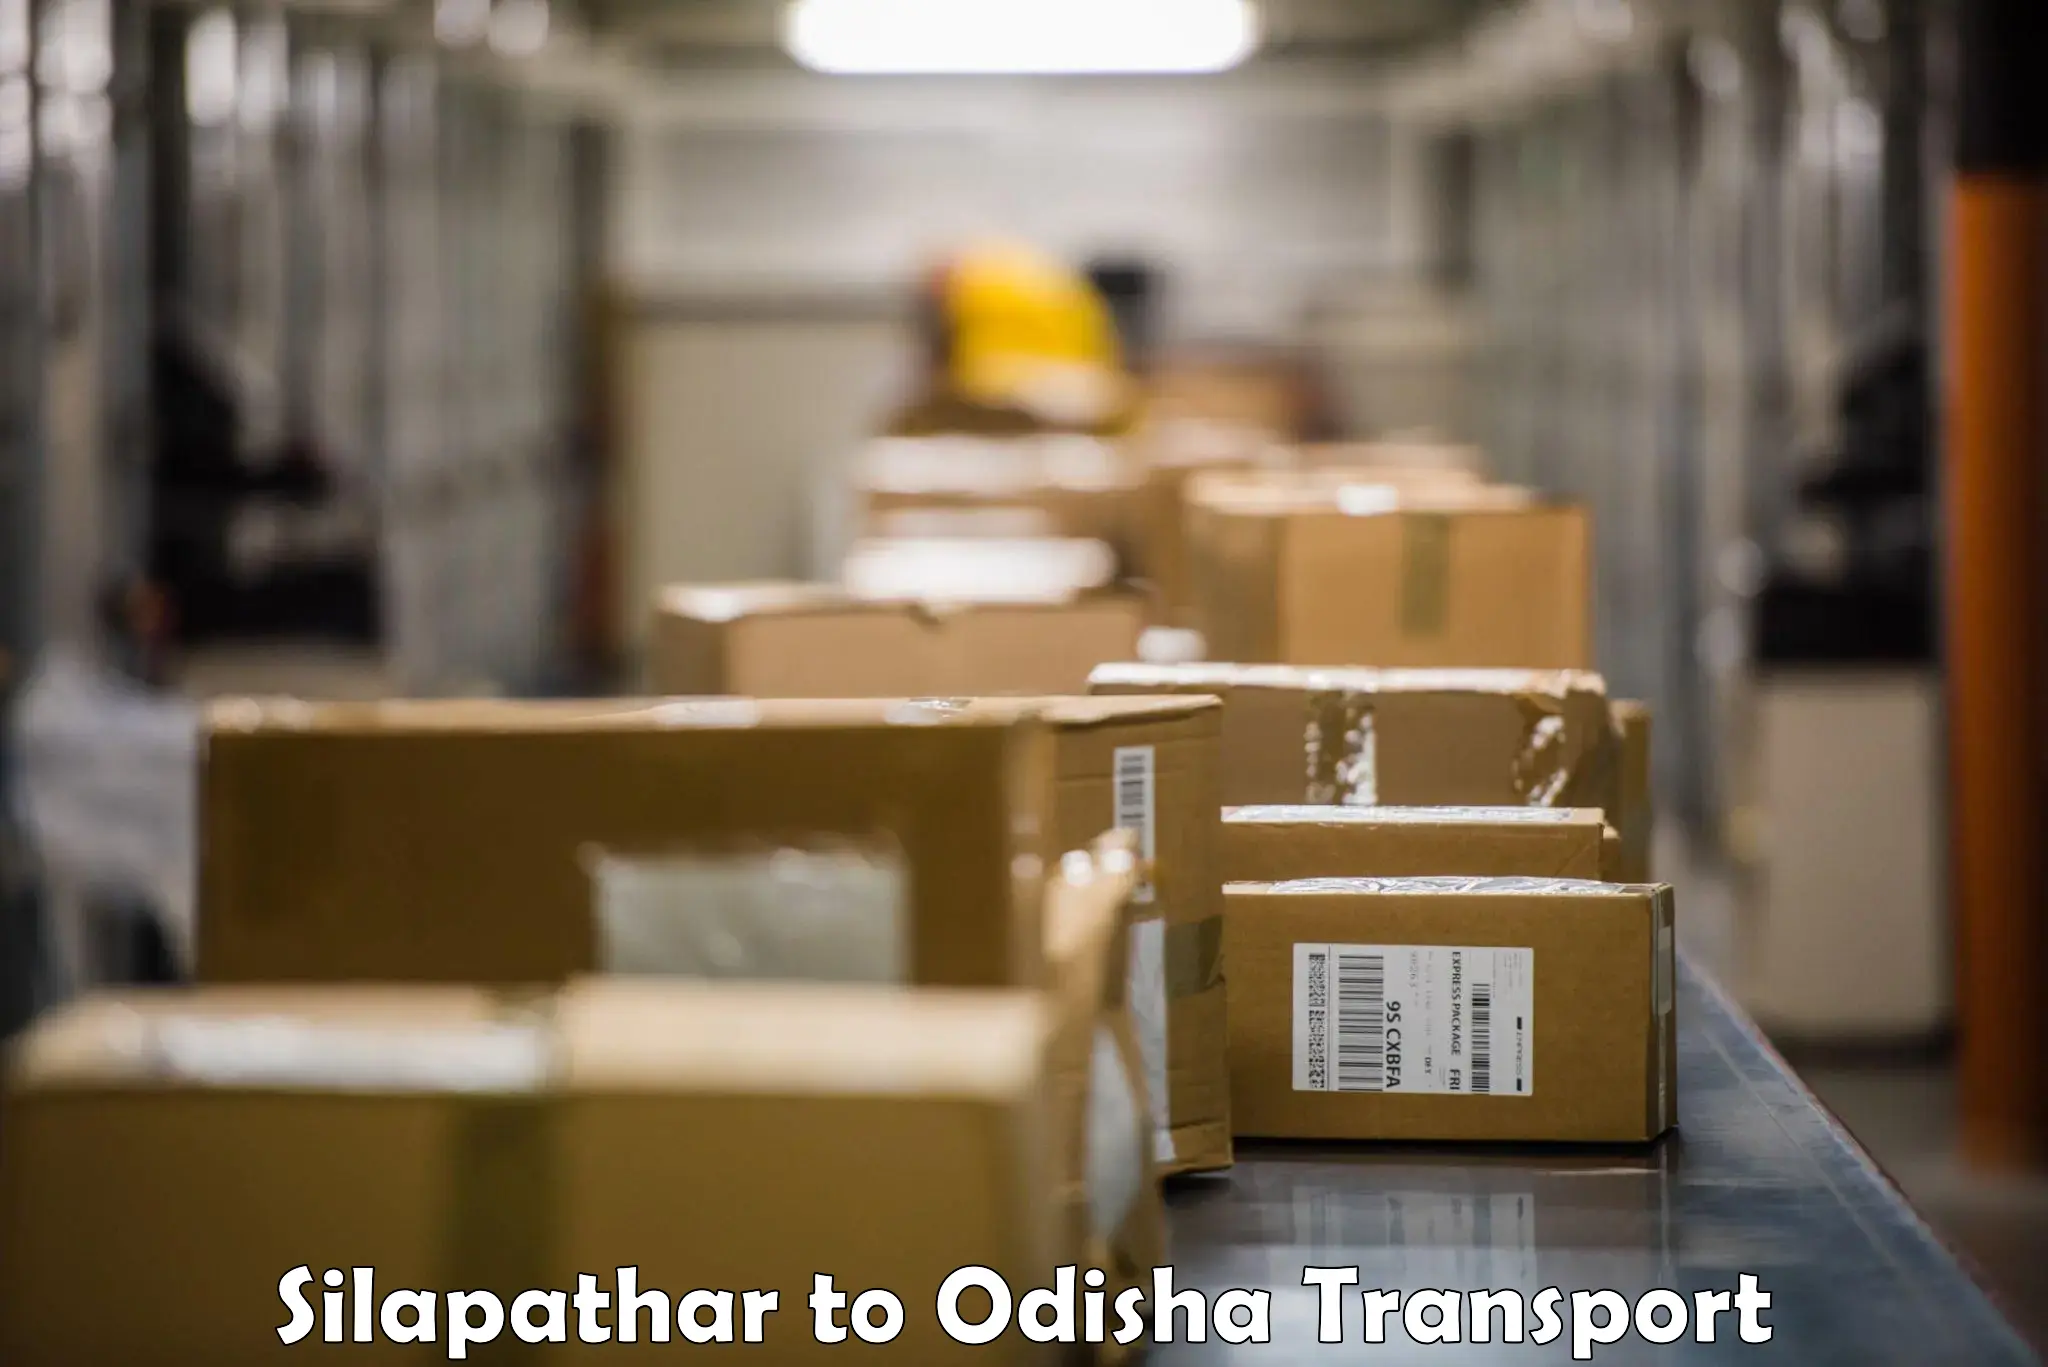 Truck transport companies in India in Silapathar to Jeypore